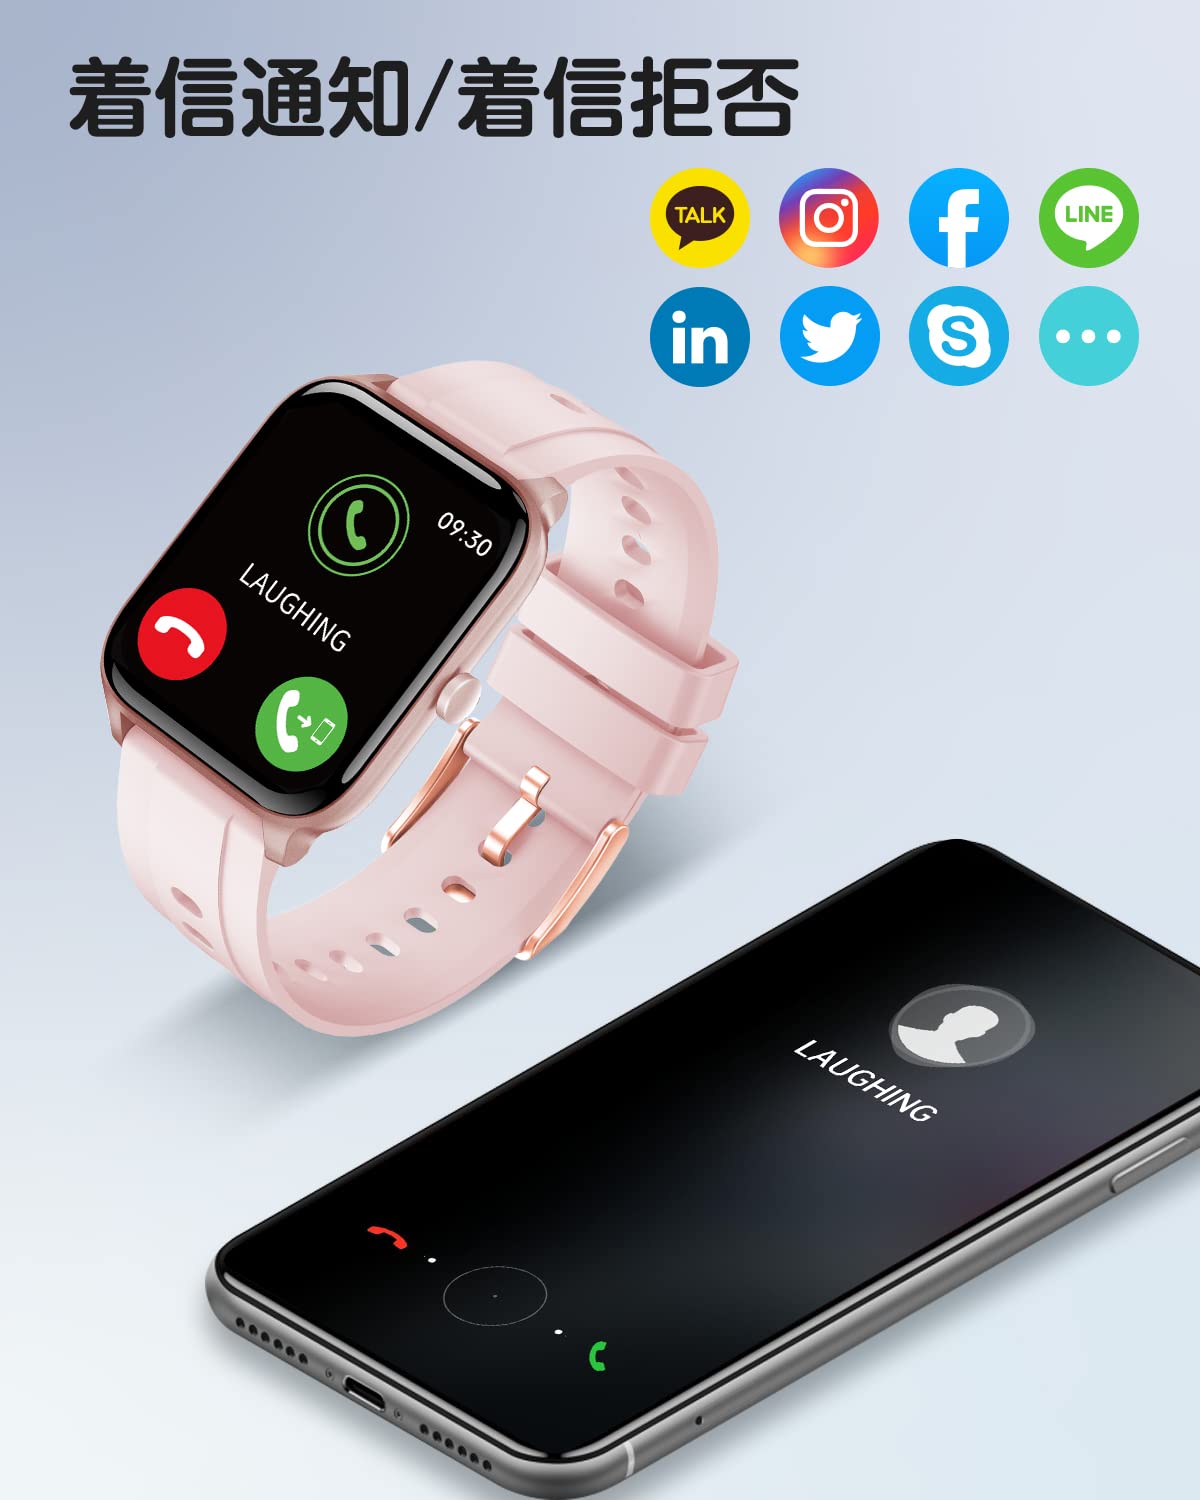 Smart Watch, Activity Monitor, Heart Rate Pedometer, Sleep Monitor, Calories Burned, Long Battery Life, Stopwatch, Timer, Free Dial Settings, Music Playback, Camera Remote, Brightness Adjustment, Incoming Call Notifications, 1.69 Inch HD Screen, IP68 Wate